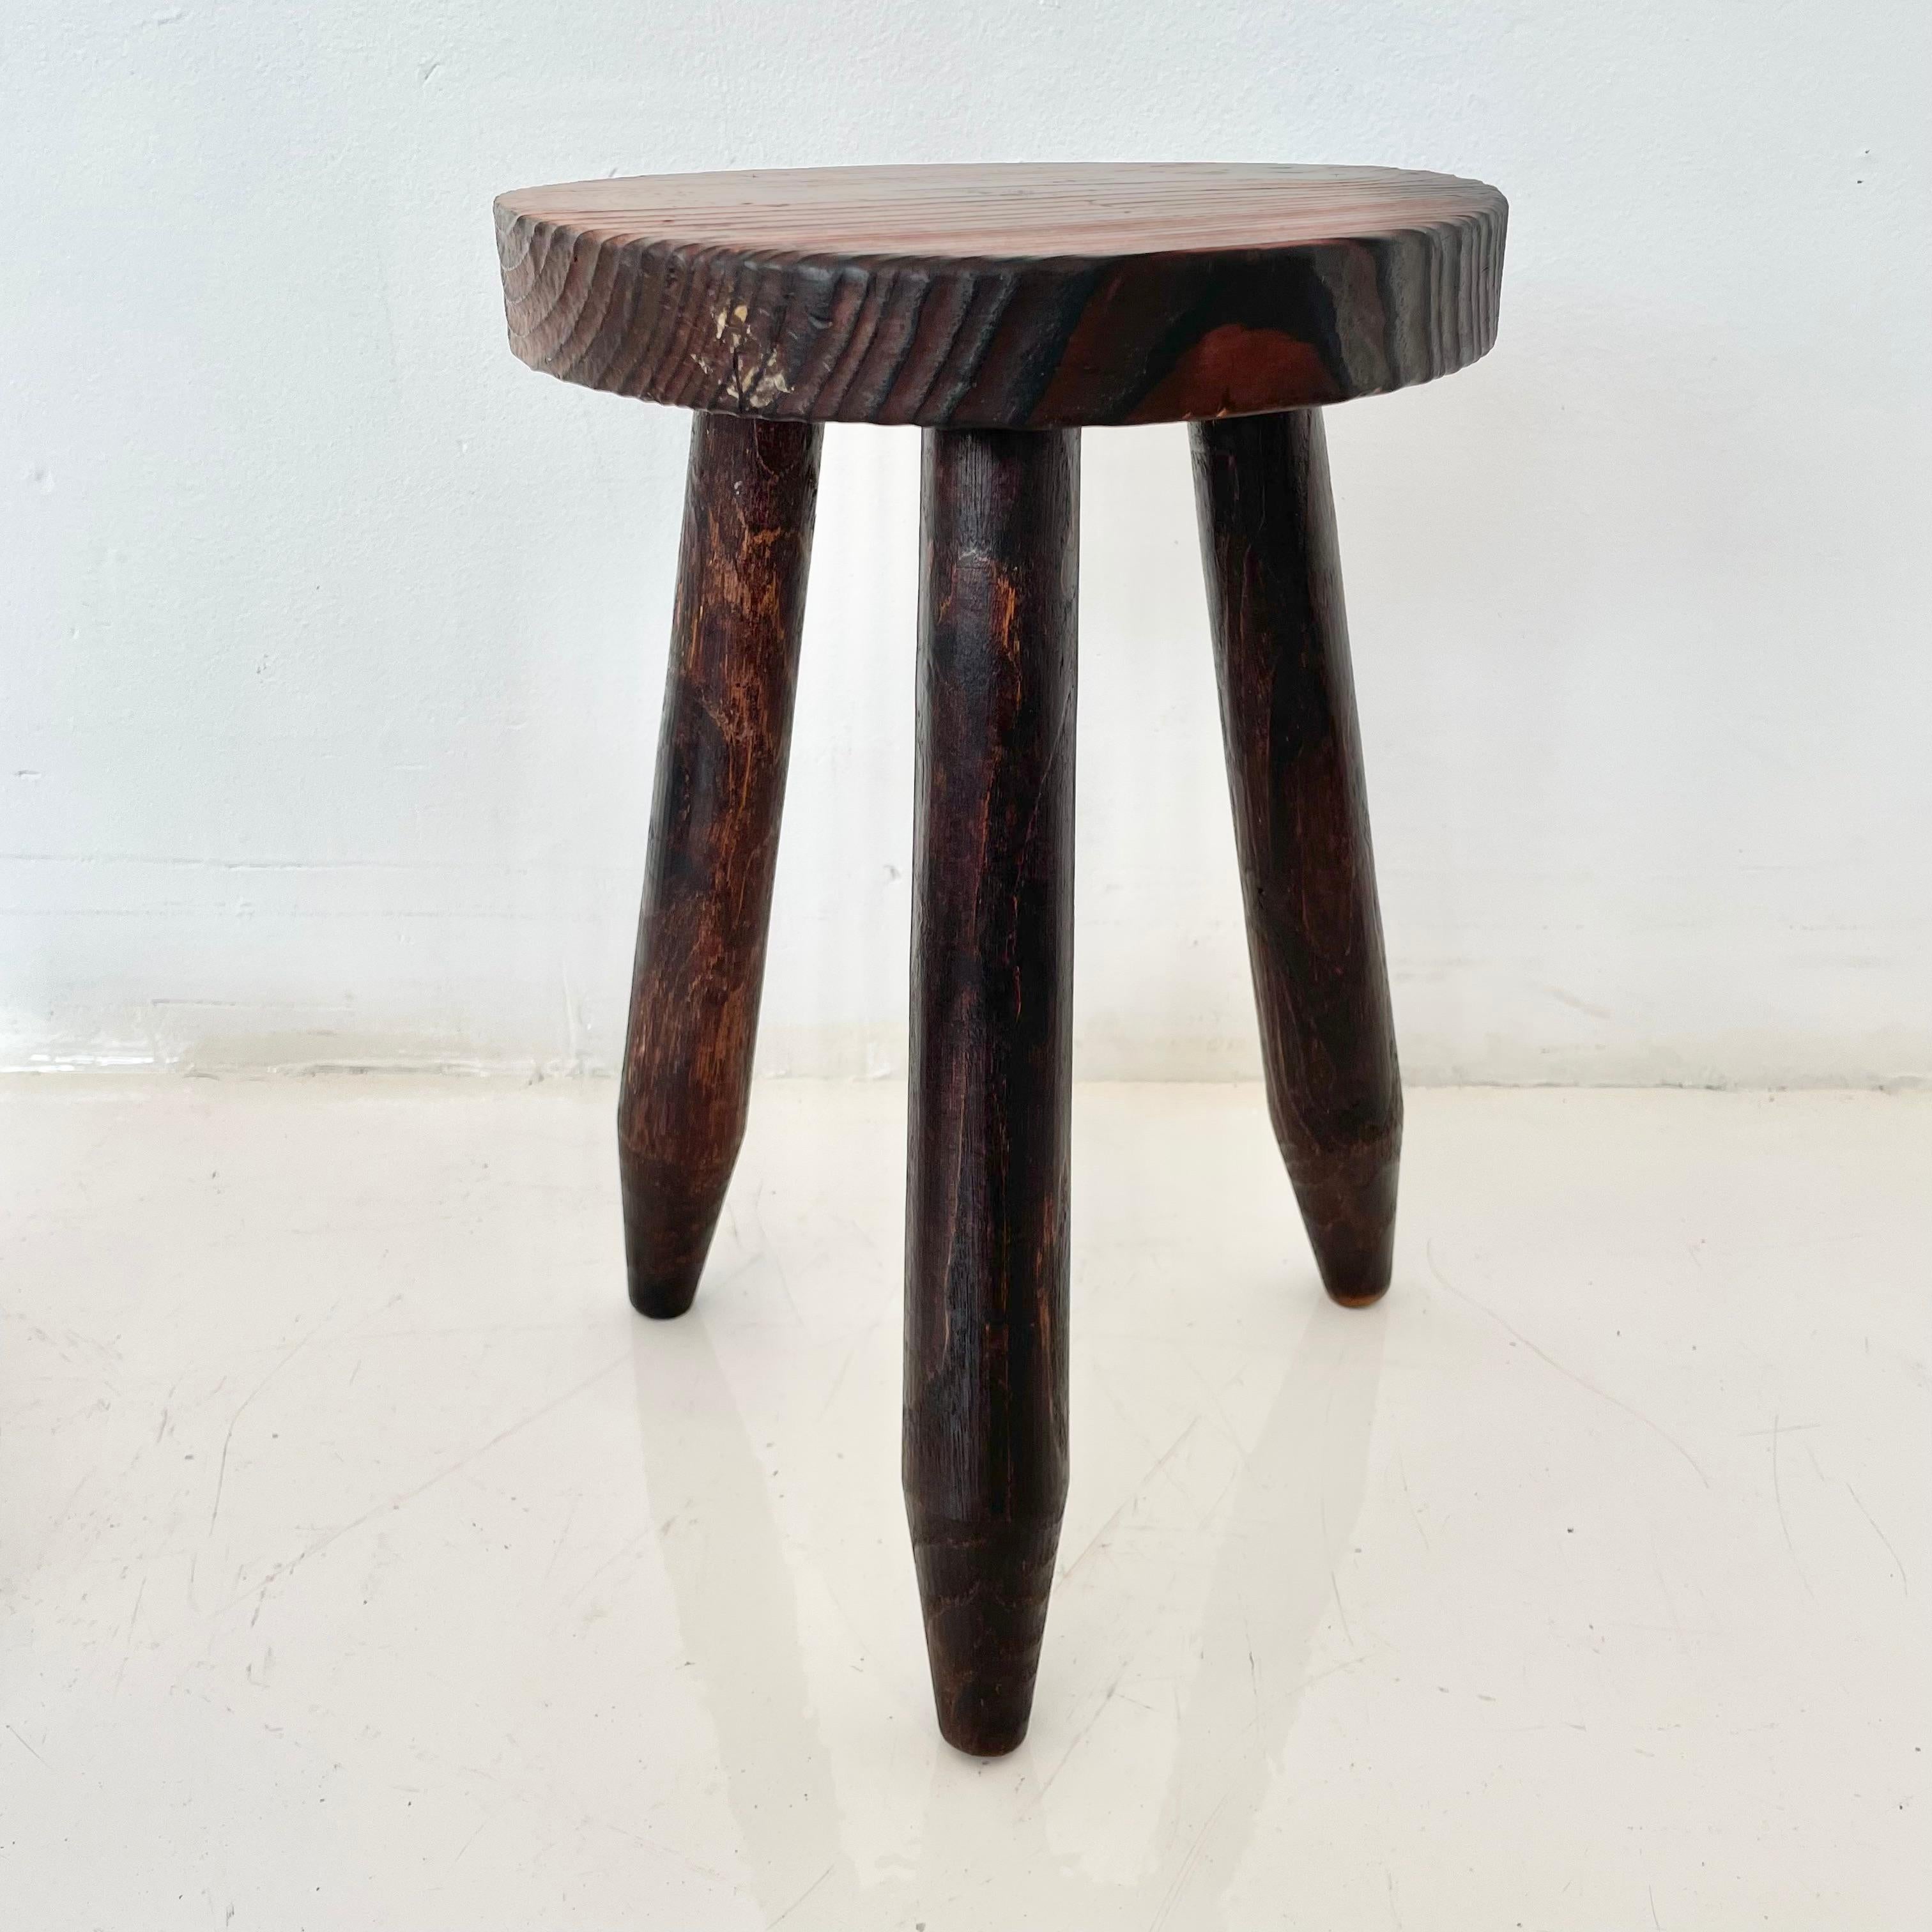 Fantastic wood stool from France in the style of Charlotte Perriand. Made in the 1960s with three tapered legs. No hardware. Beautiful wood grain and texture as well as a deep burgundy color to wood. Good vintage condition.
 